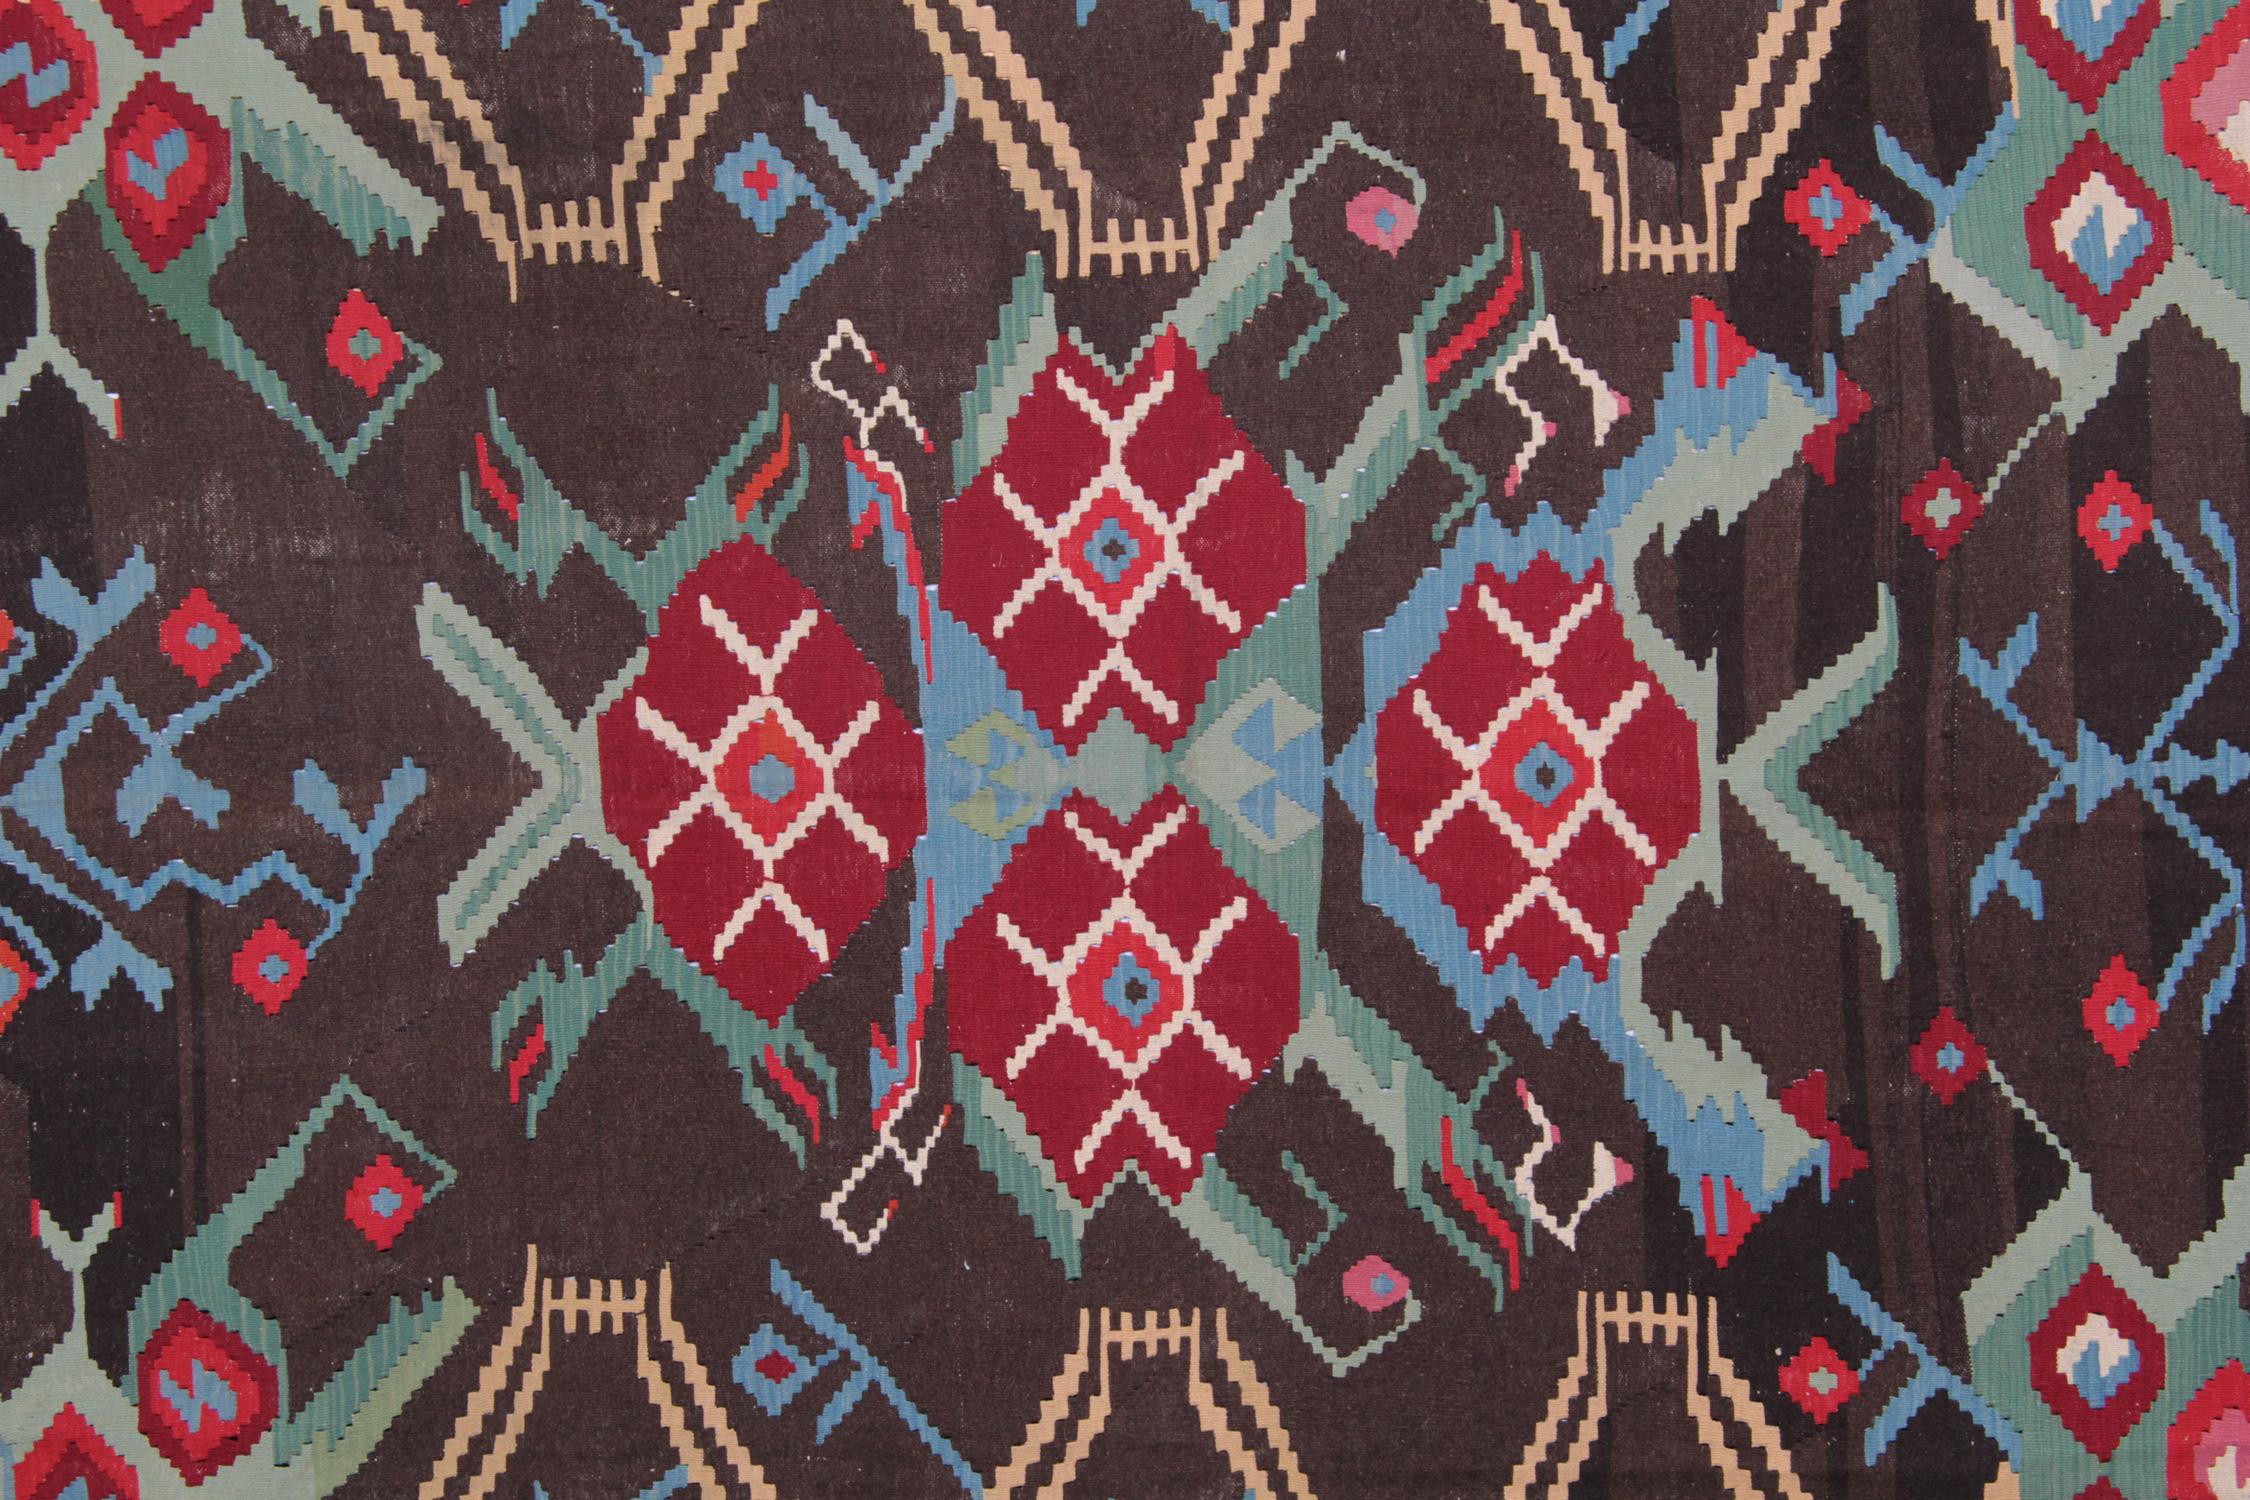 This colorful carpet rug is woven by very skilled weavers in Karabagh, who used the highest quality wool and cotton. The flat-weave rug has blue, green, grey, pink, brown and red colors. The dark brown background of this geometric rug has the same